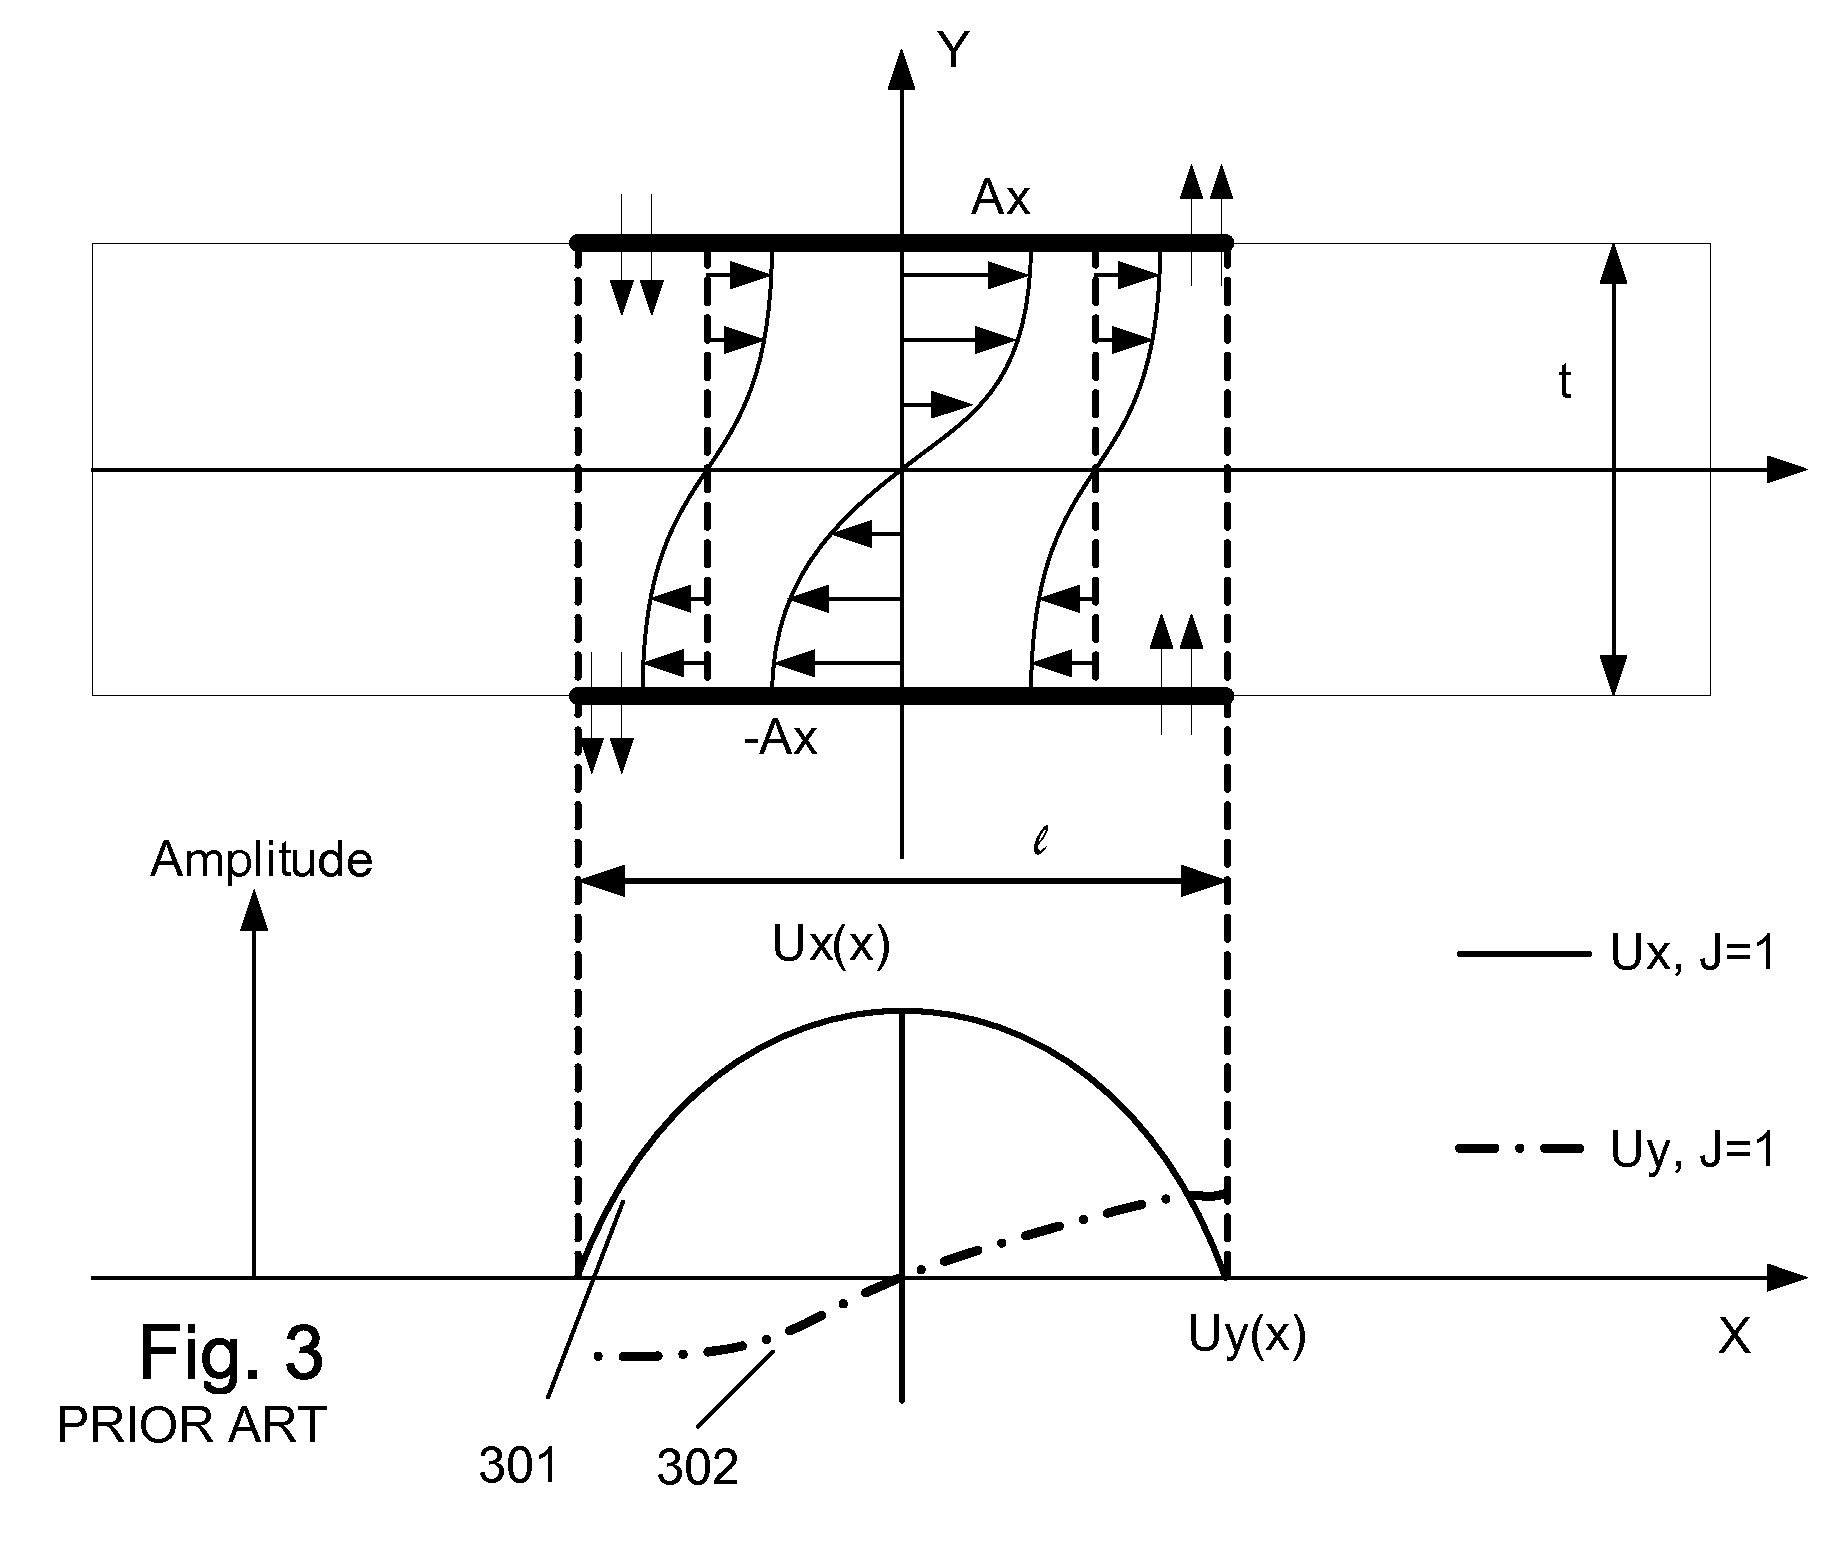 Lateral Excitation of Pure Shear Modes